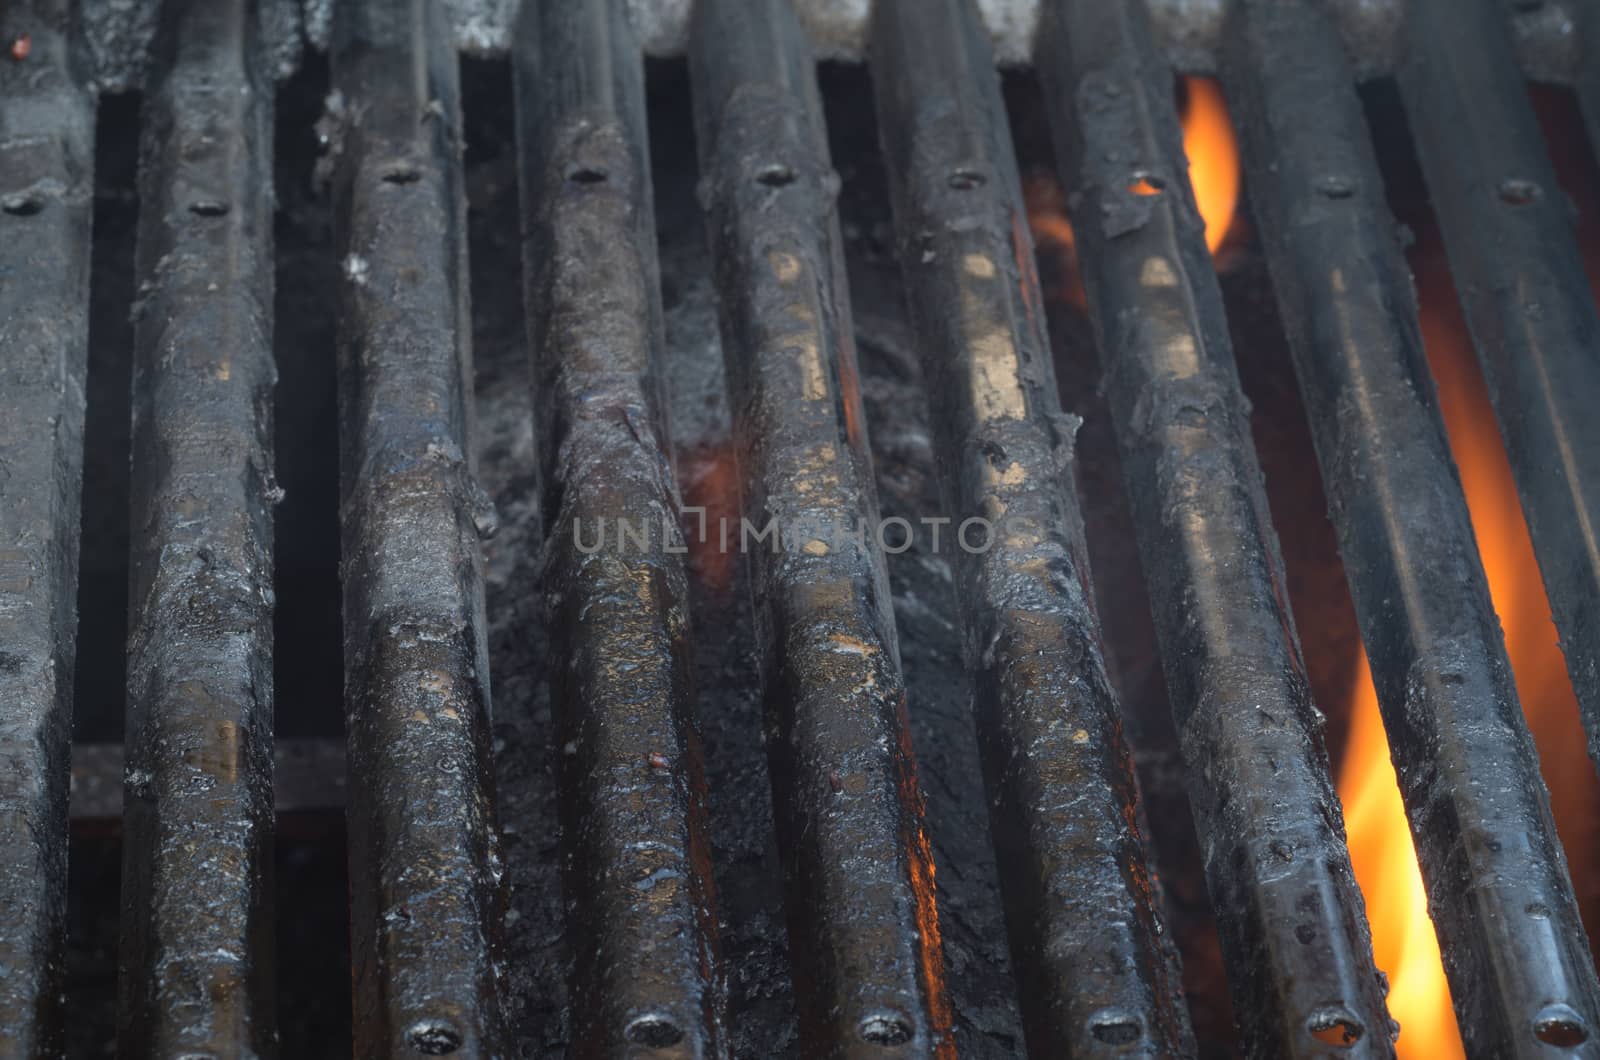 Dirty BBQ grill with flames by daoleduc